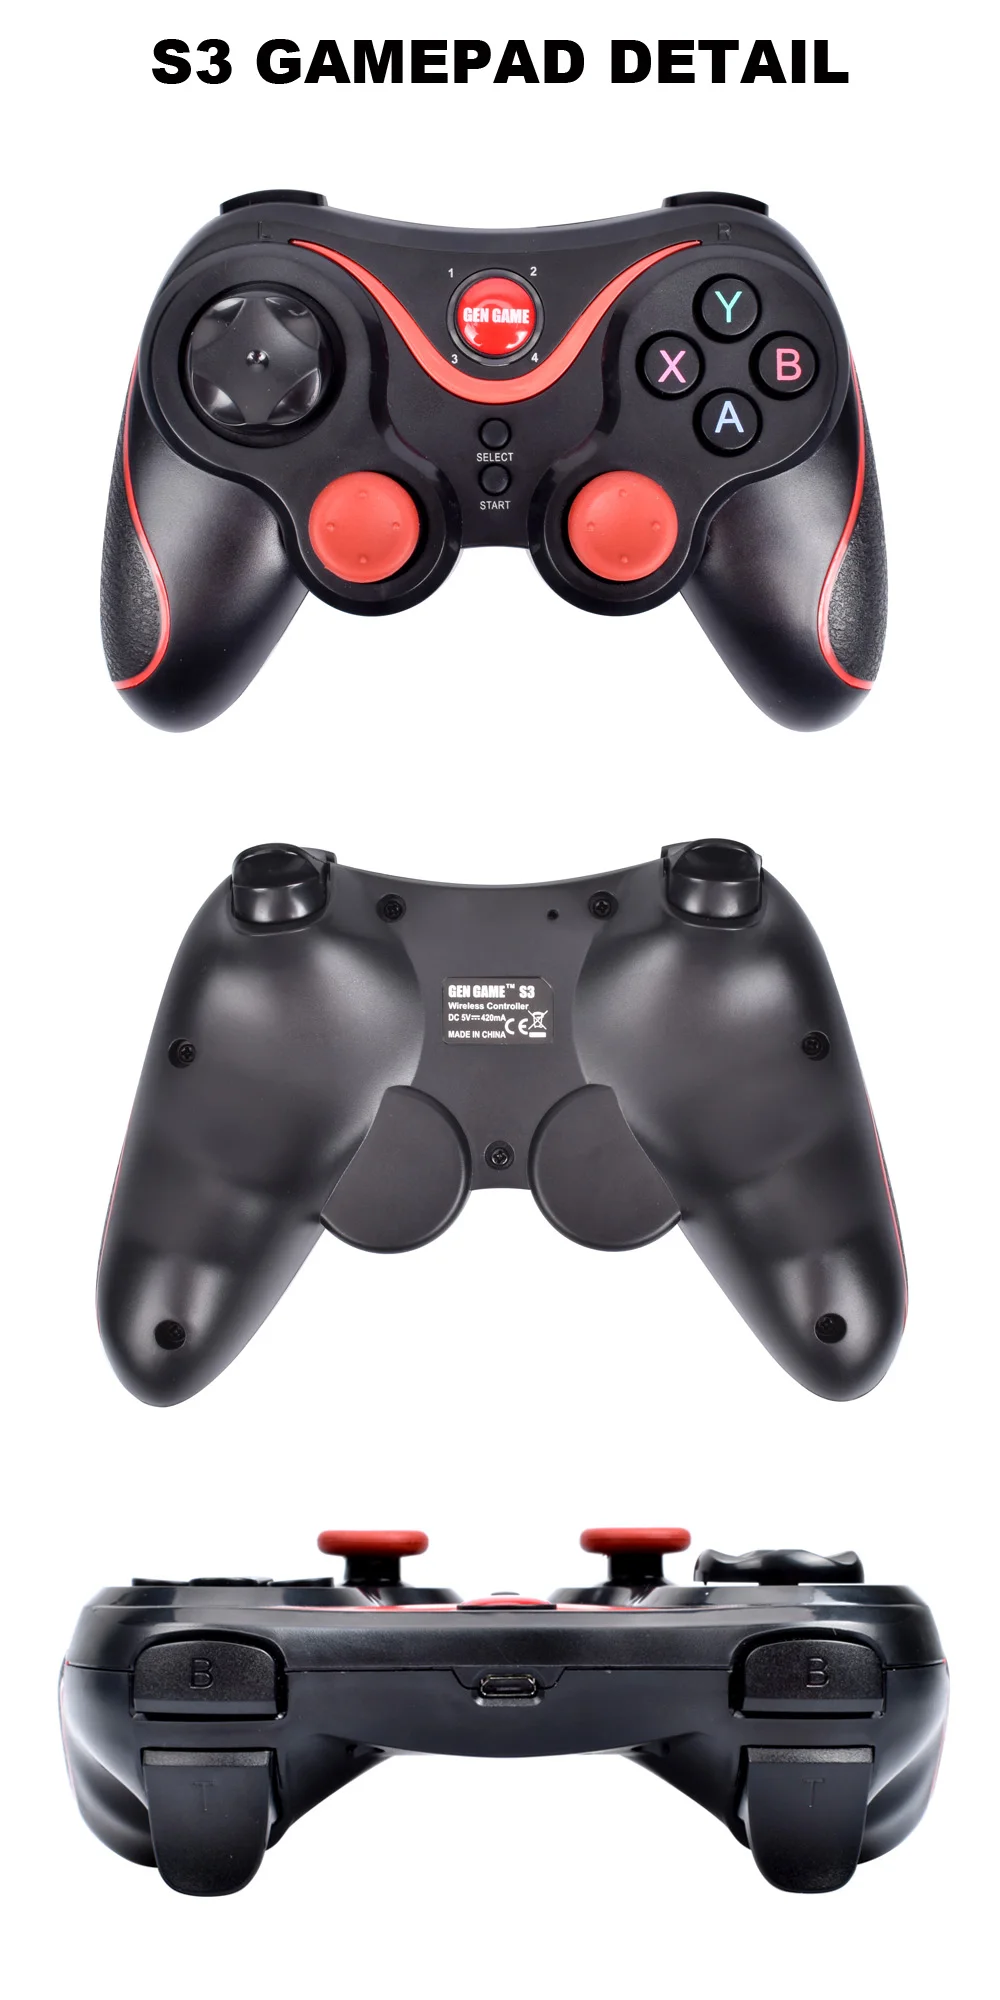 verhaal Ineenstorting binair S3 Wireless Game Controller Gamepad Joystick For Android Cellphone Tablet  Tv Box,Pad,Tablet - Buy Tv Box Gamepad,Gamepad Controller For  Android,Cellphone Gamepad Product on Alibaba.com